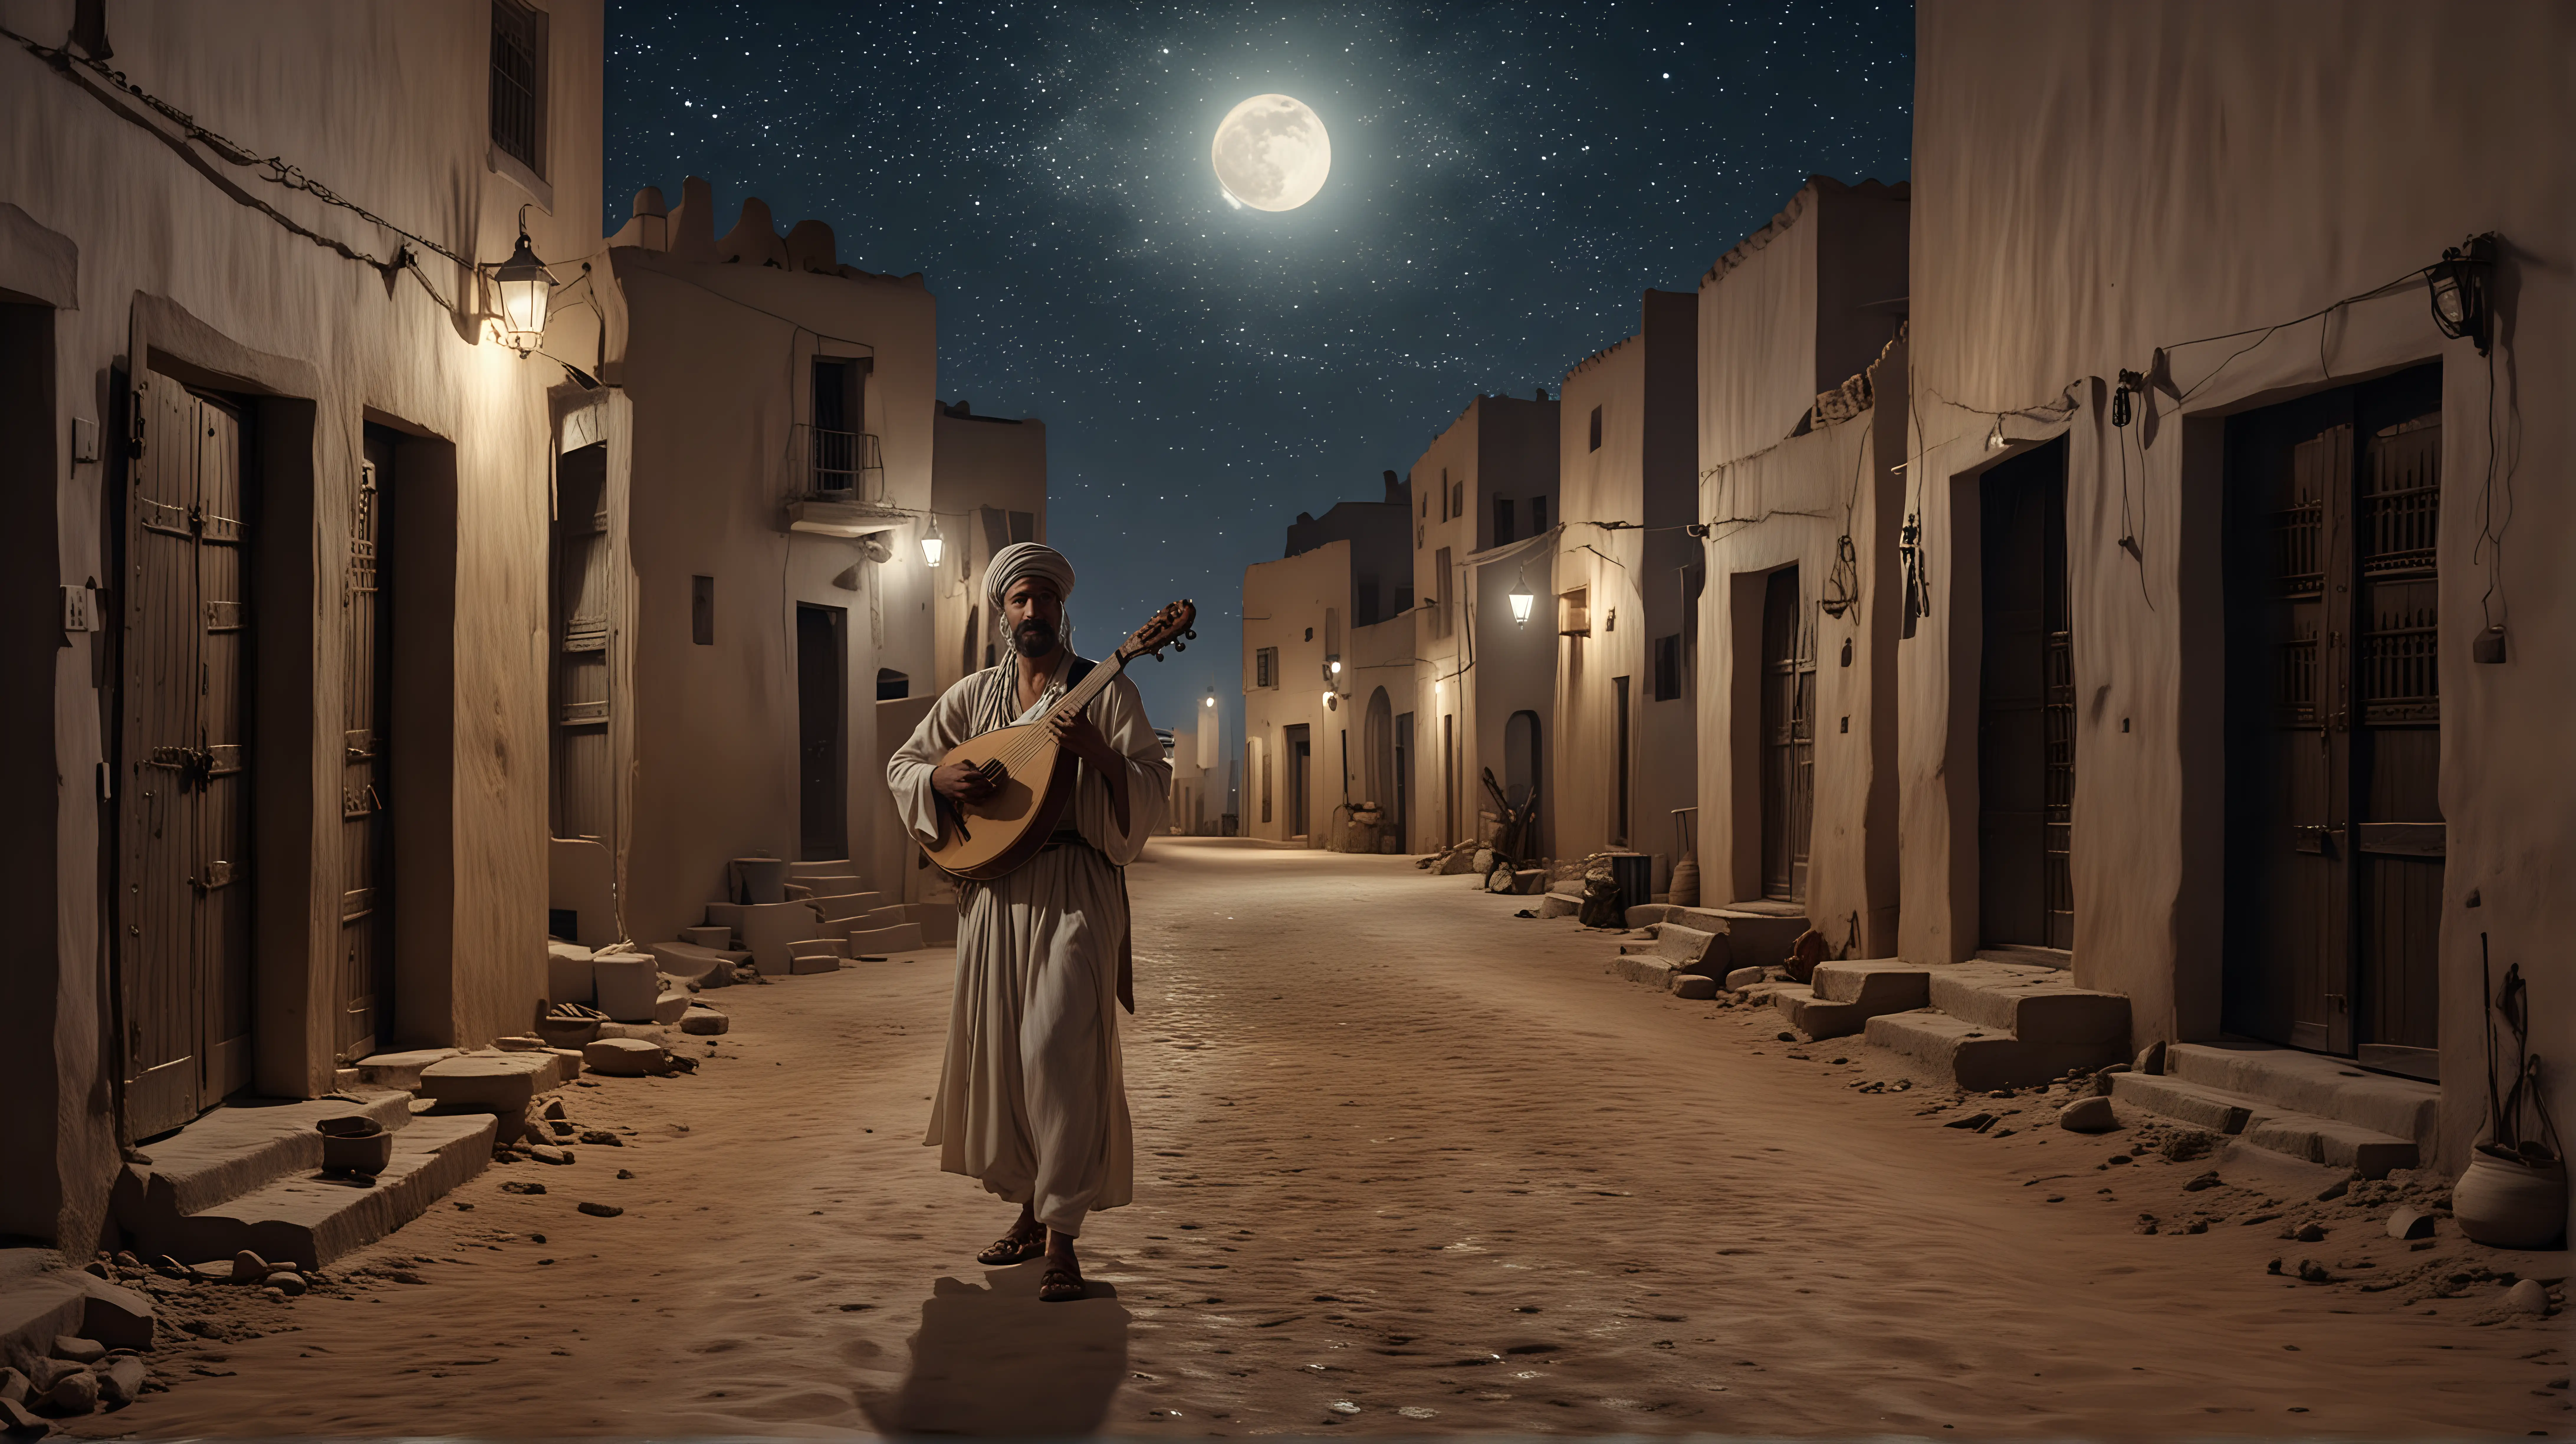 Moroccan Musician Arriving Home at Night with Arabian Lute